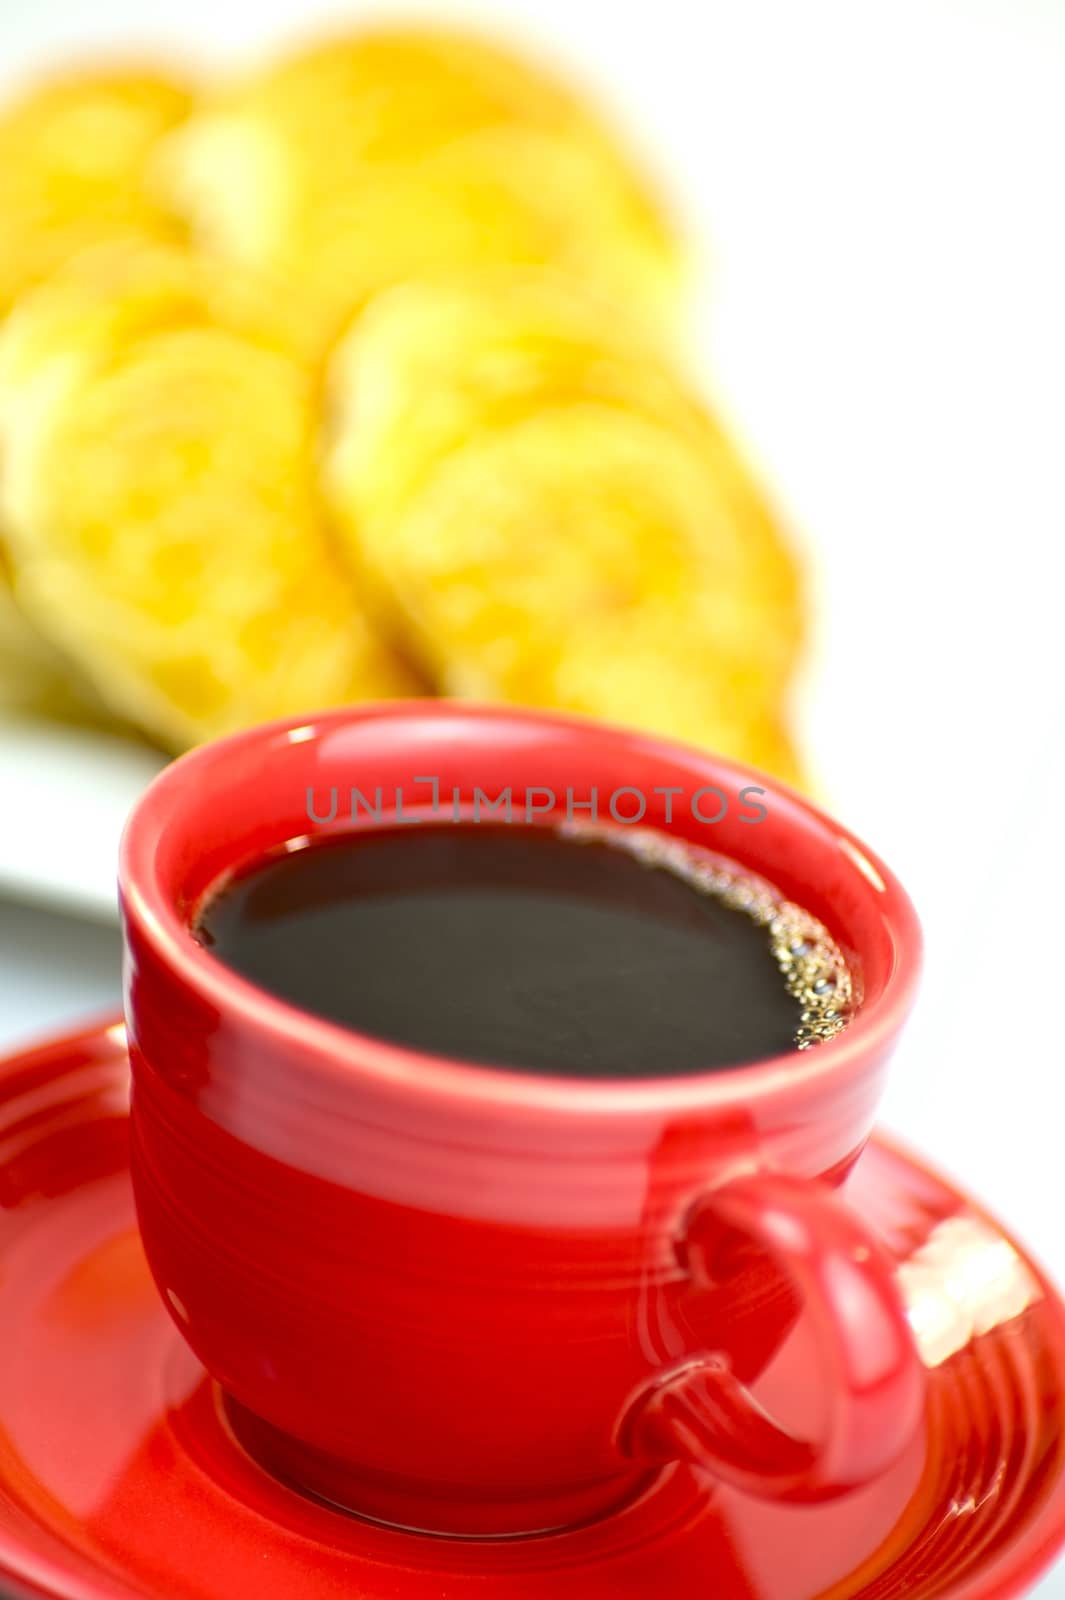 Morning Breakfast.  Hot Coffee, Red Cup and Fresh Croissants. White Background. Elegant Composition.